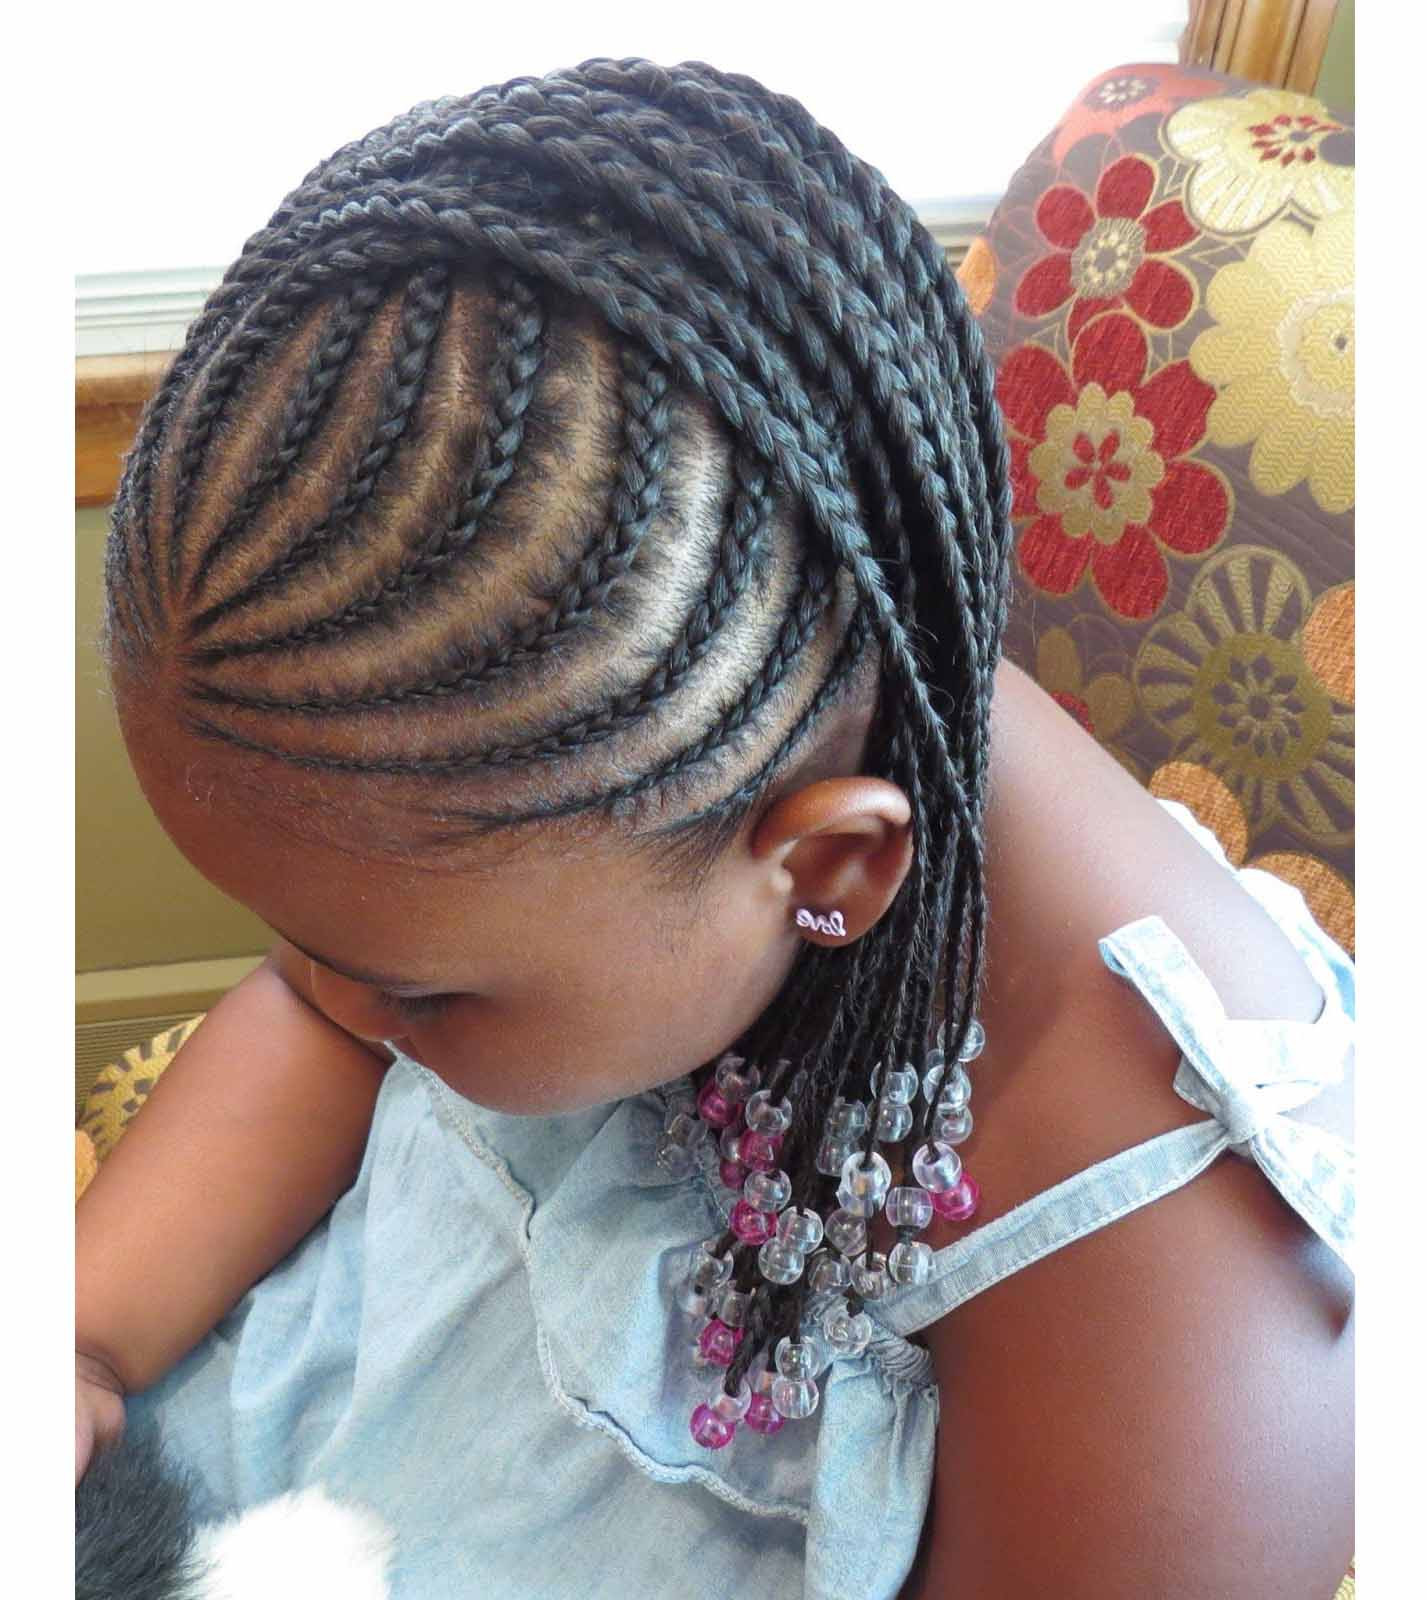 Girls Hairstyle Braids
 64 Cool Braided Hairstyles for Little Black Girls – Page 2